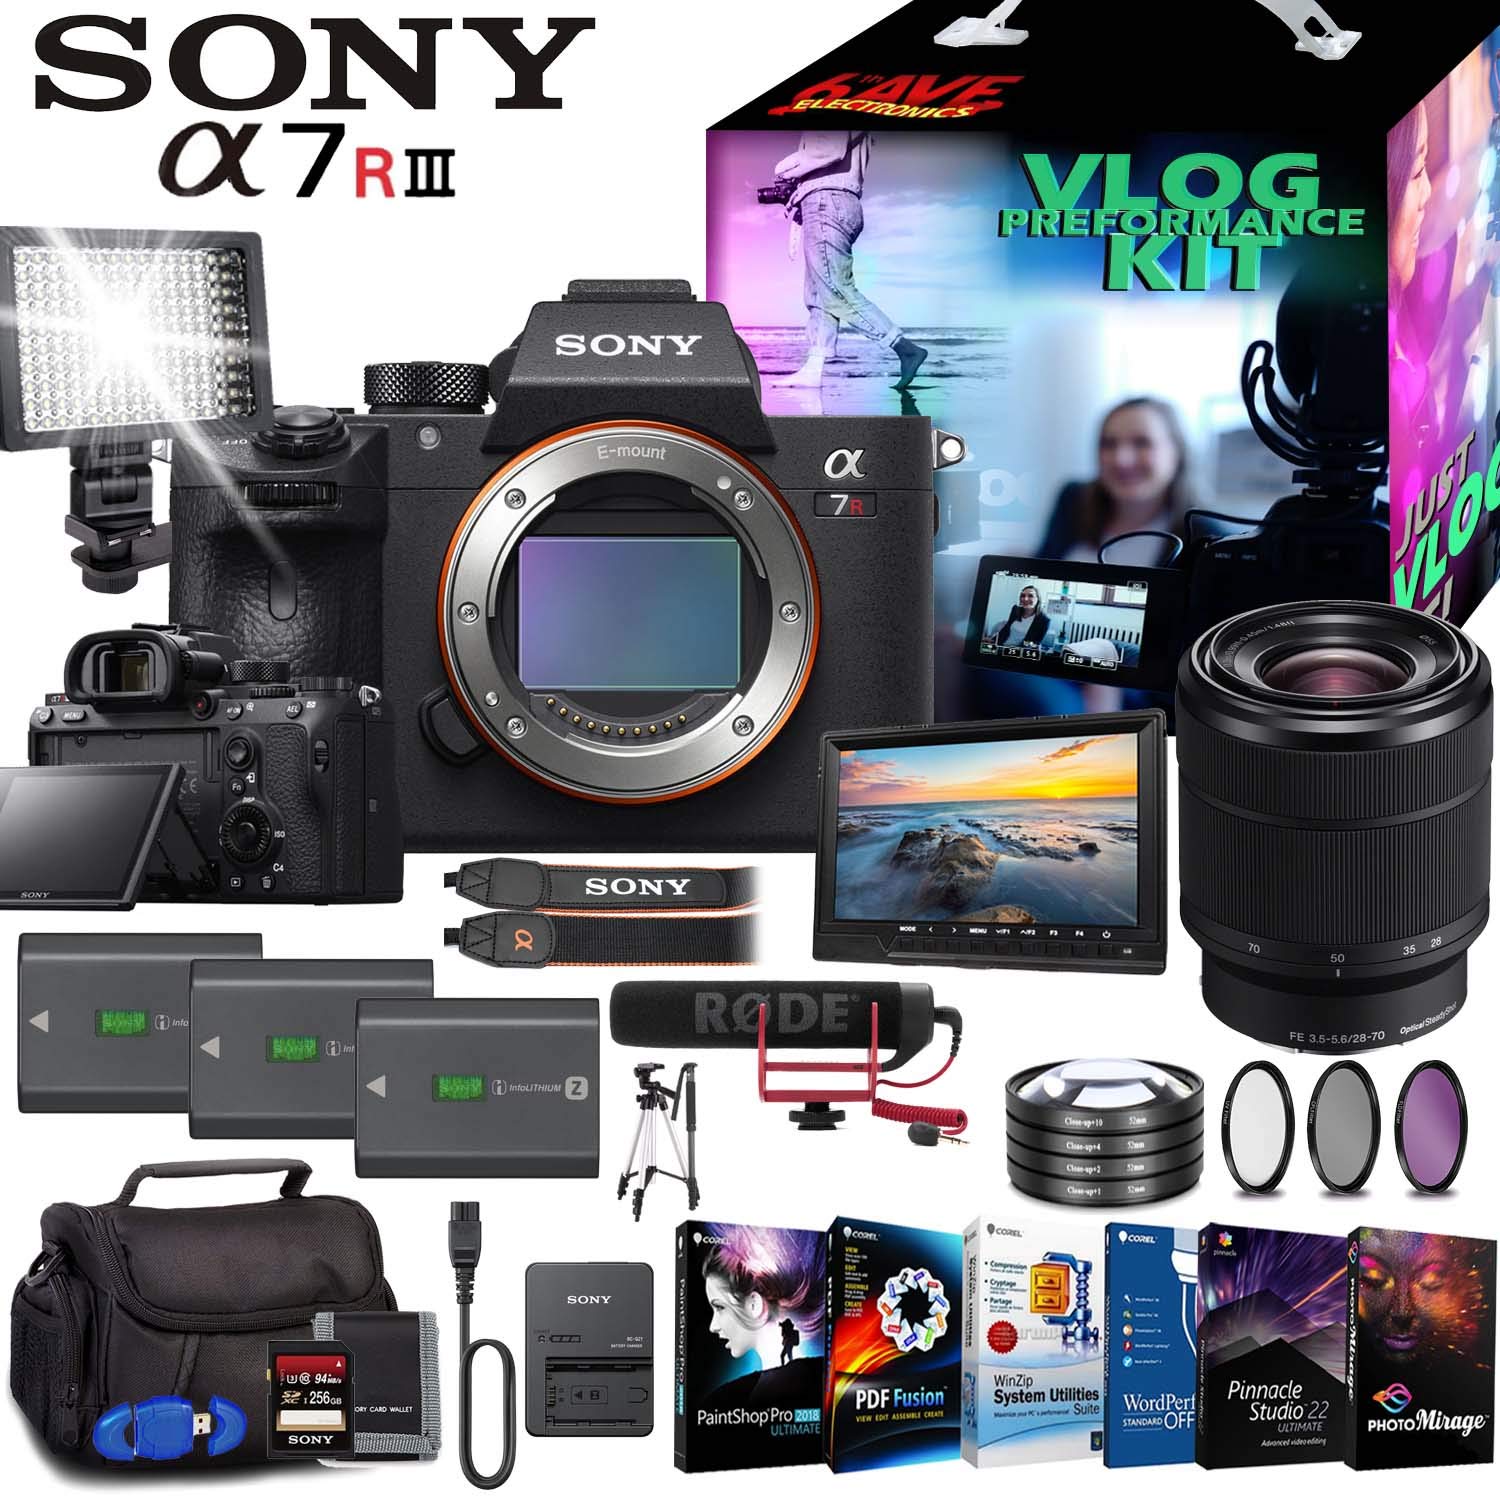 Sony Alpha a7R III Mirrorless Digital Camera with 28-70mm Lens Fully Loaded Vlogging Kit